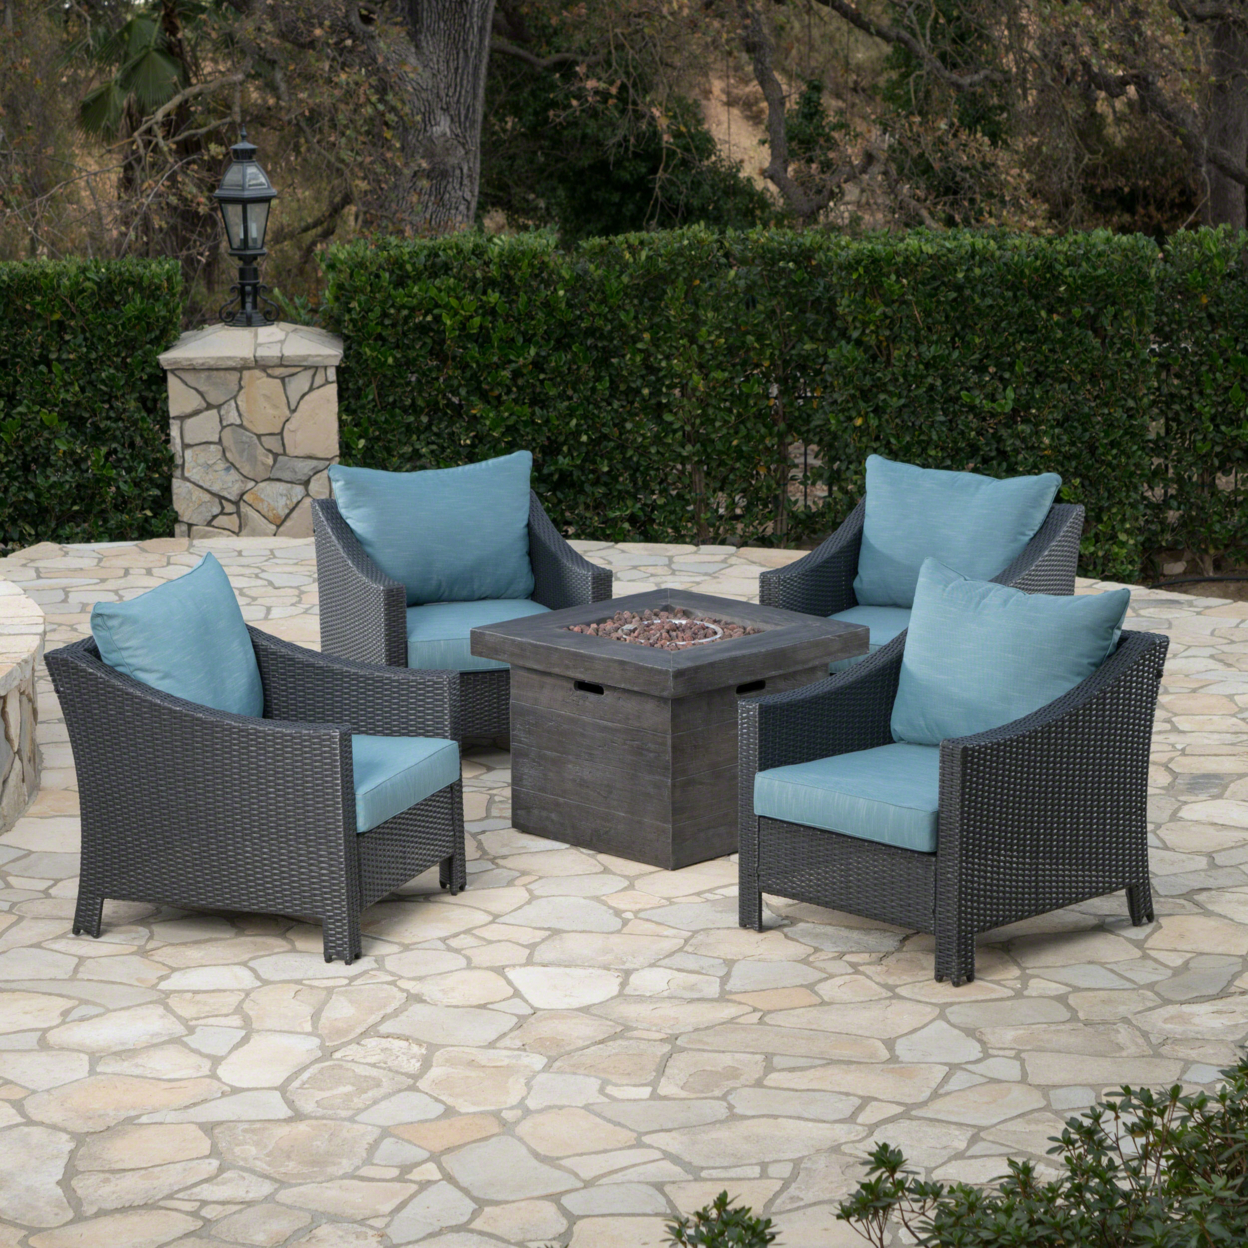 Andrew Outdoor 5 Piece Wicker Water Resistant Cushion Chat Set With Fire Pit - Teal